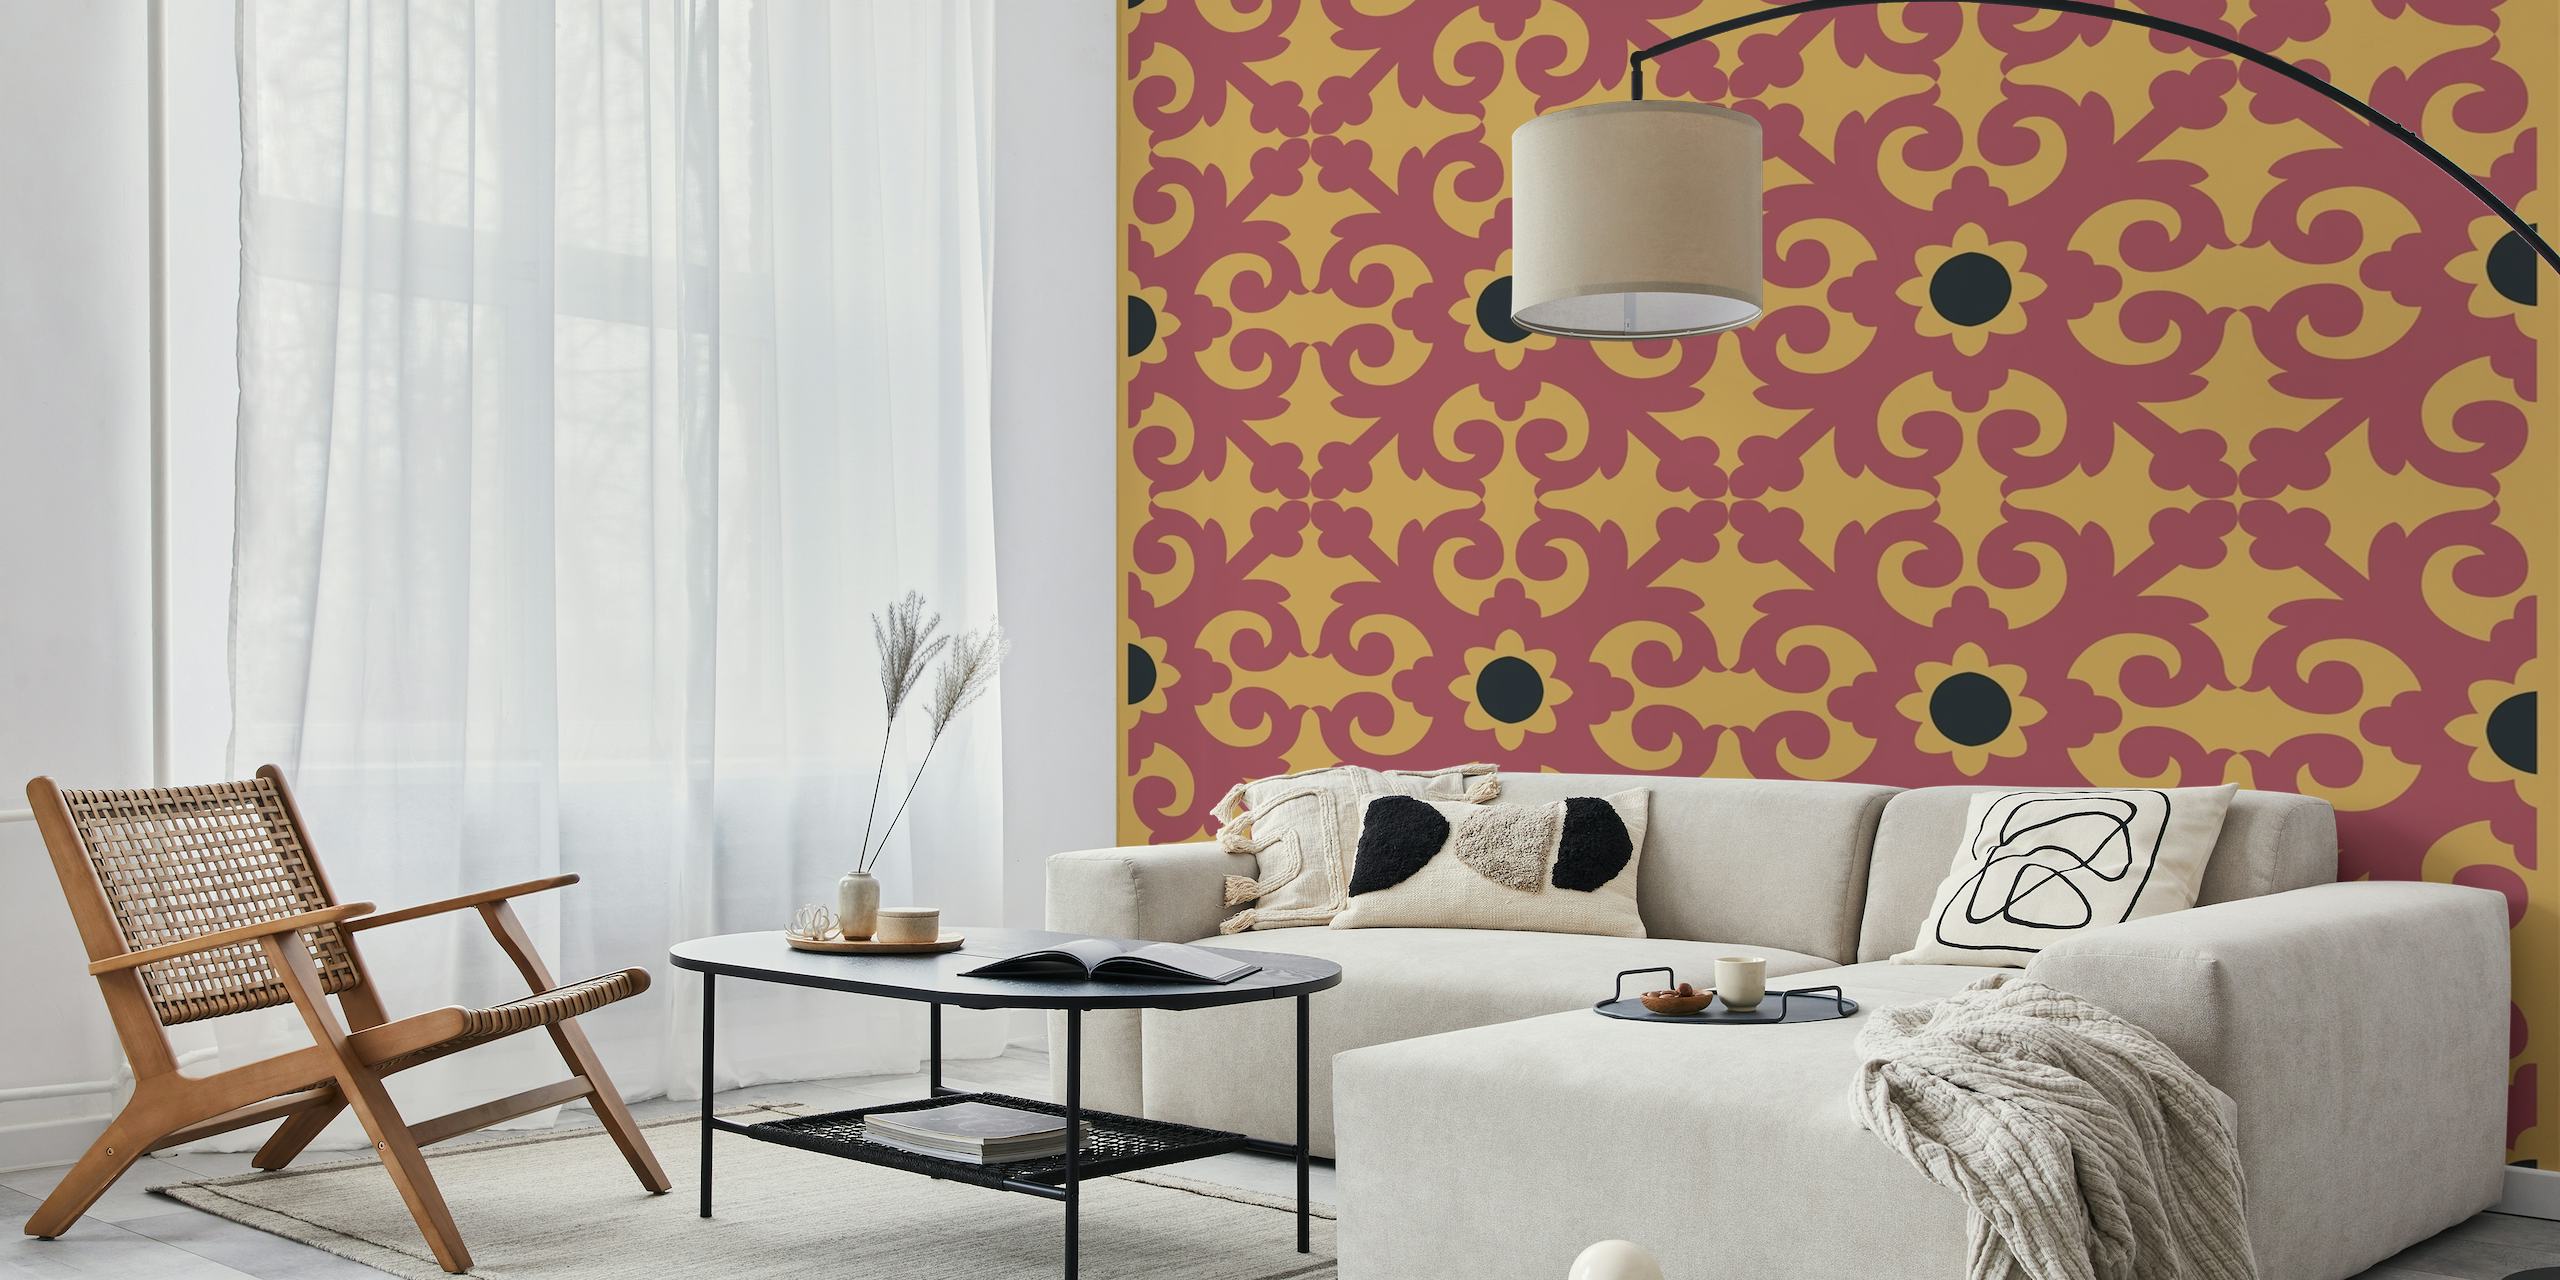 Turkish Kilim patterned wall mural in saffron yellow and red wine hues.